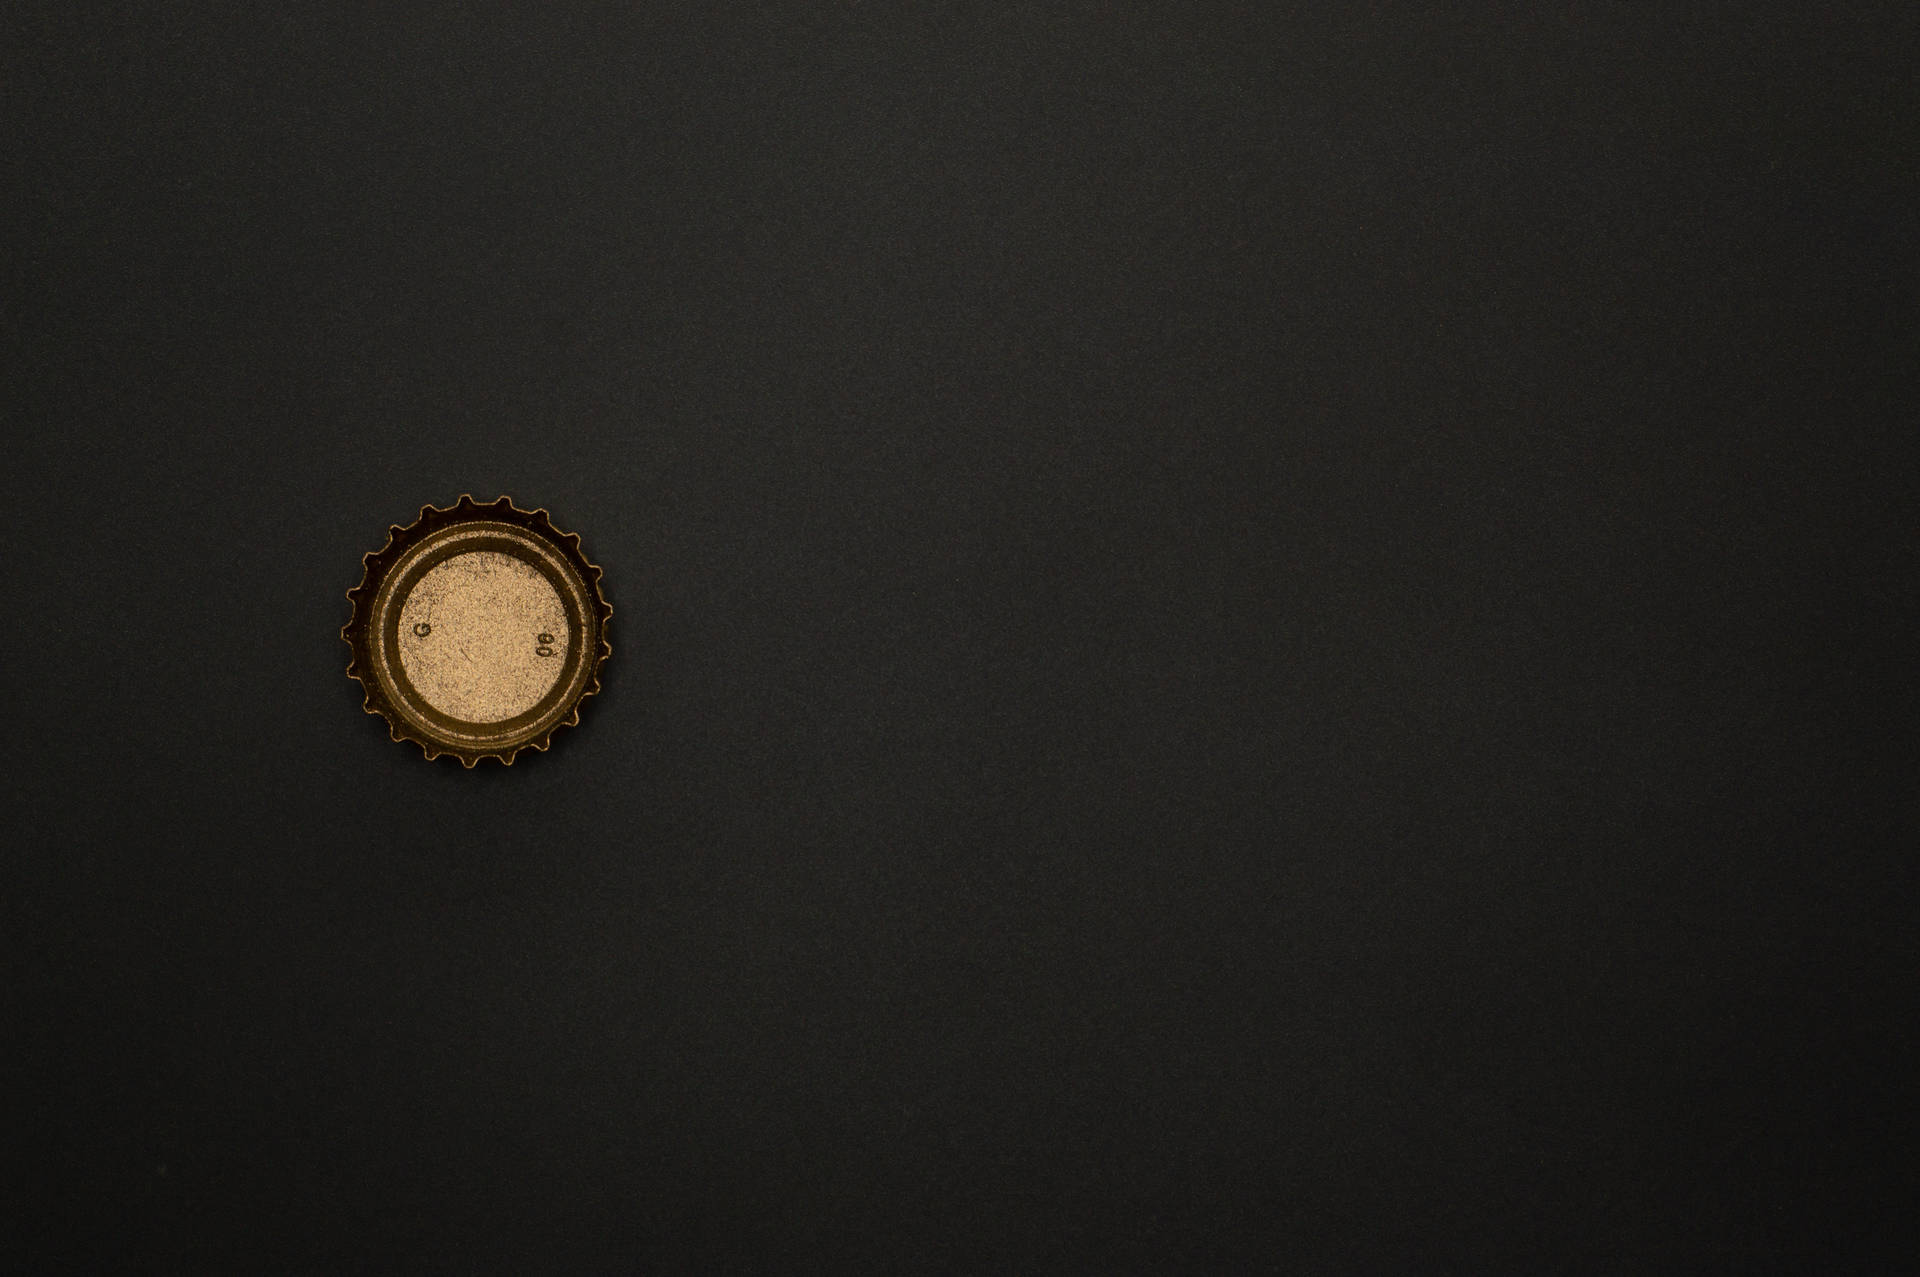 Bottle Cap Black And Gold Iphone